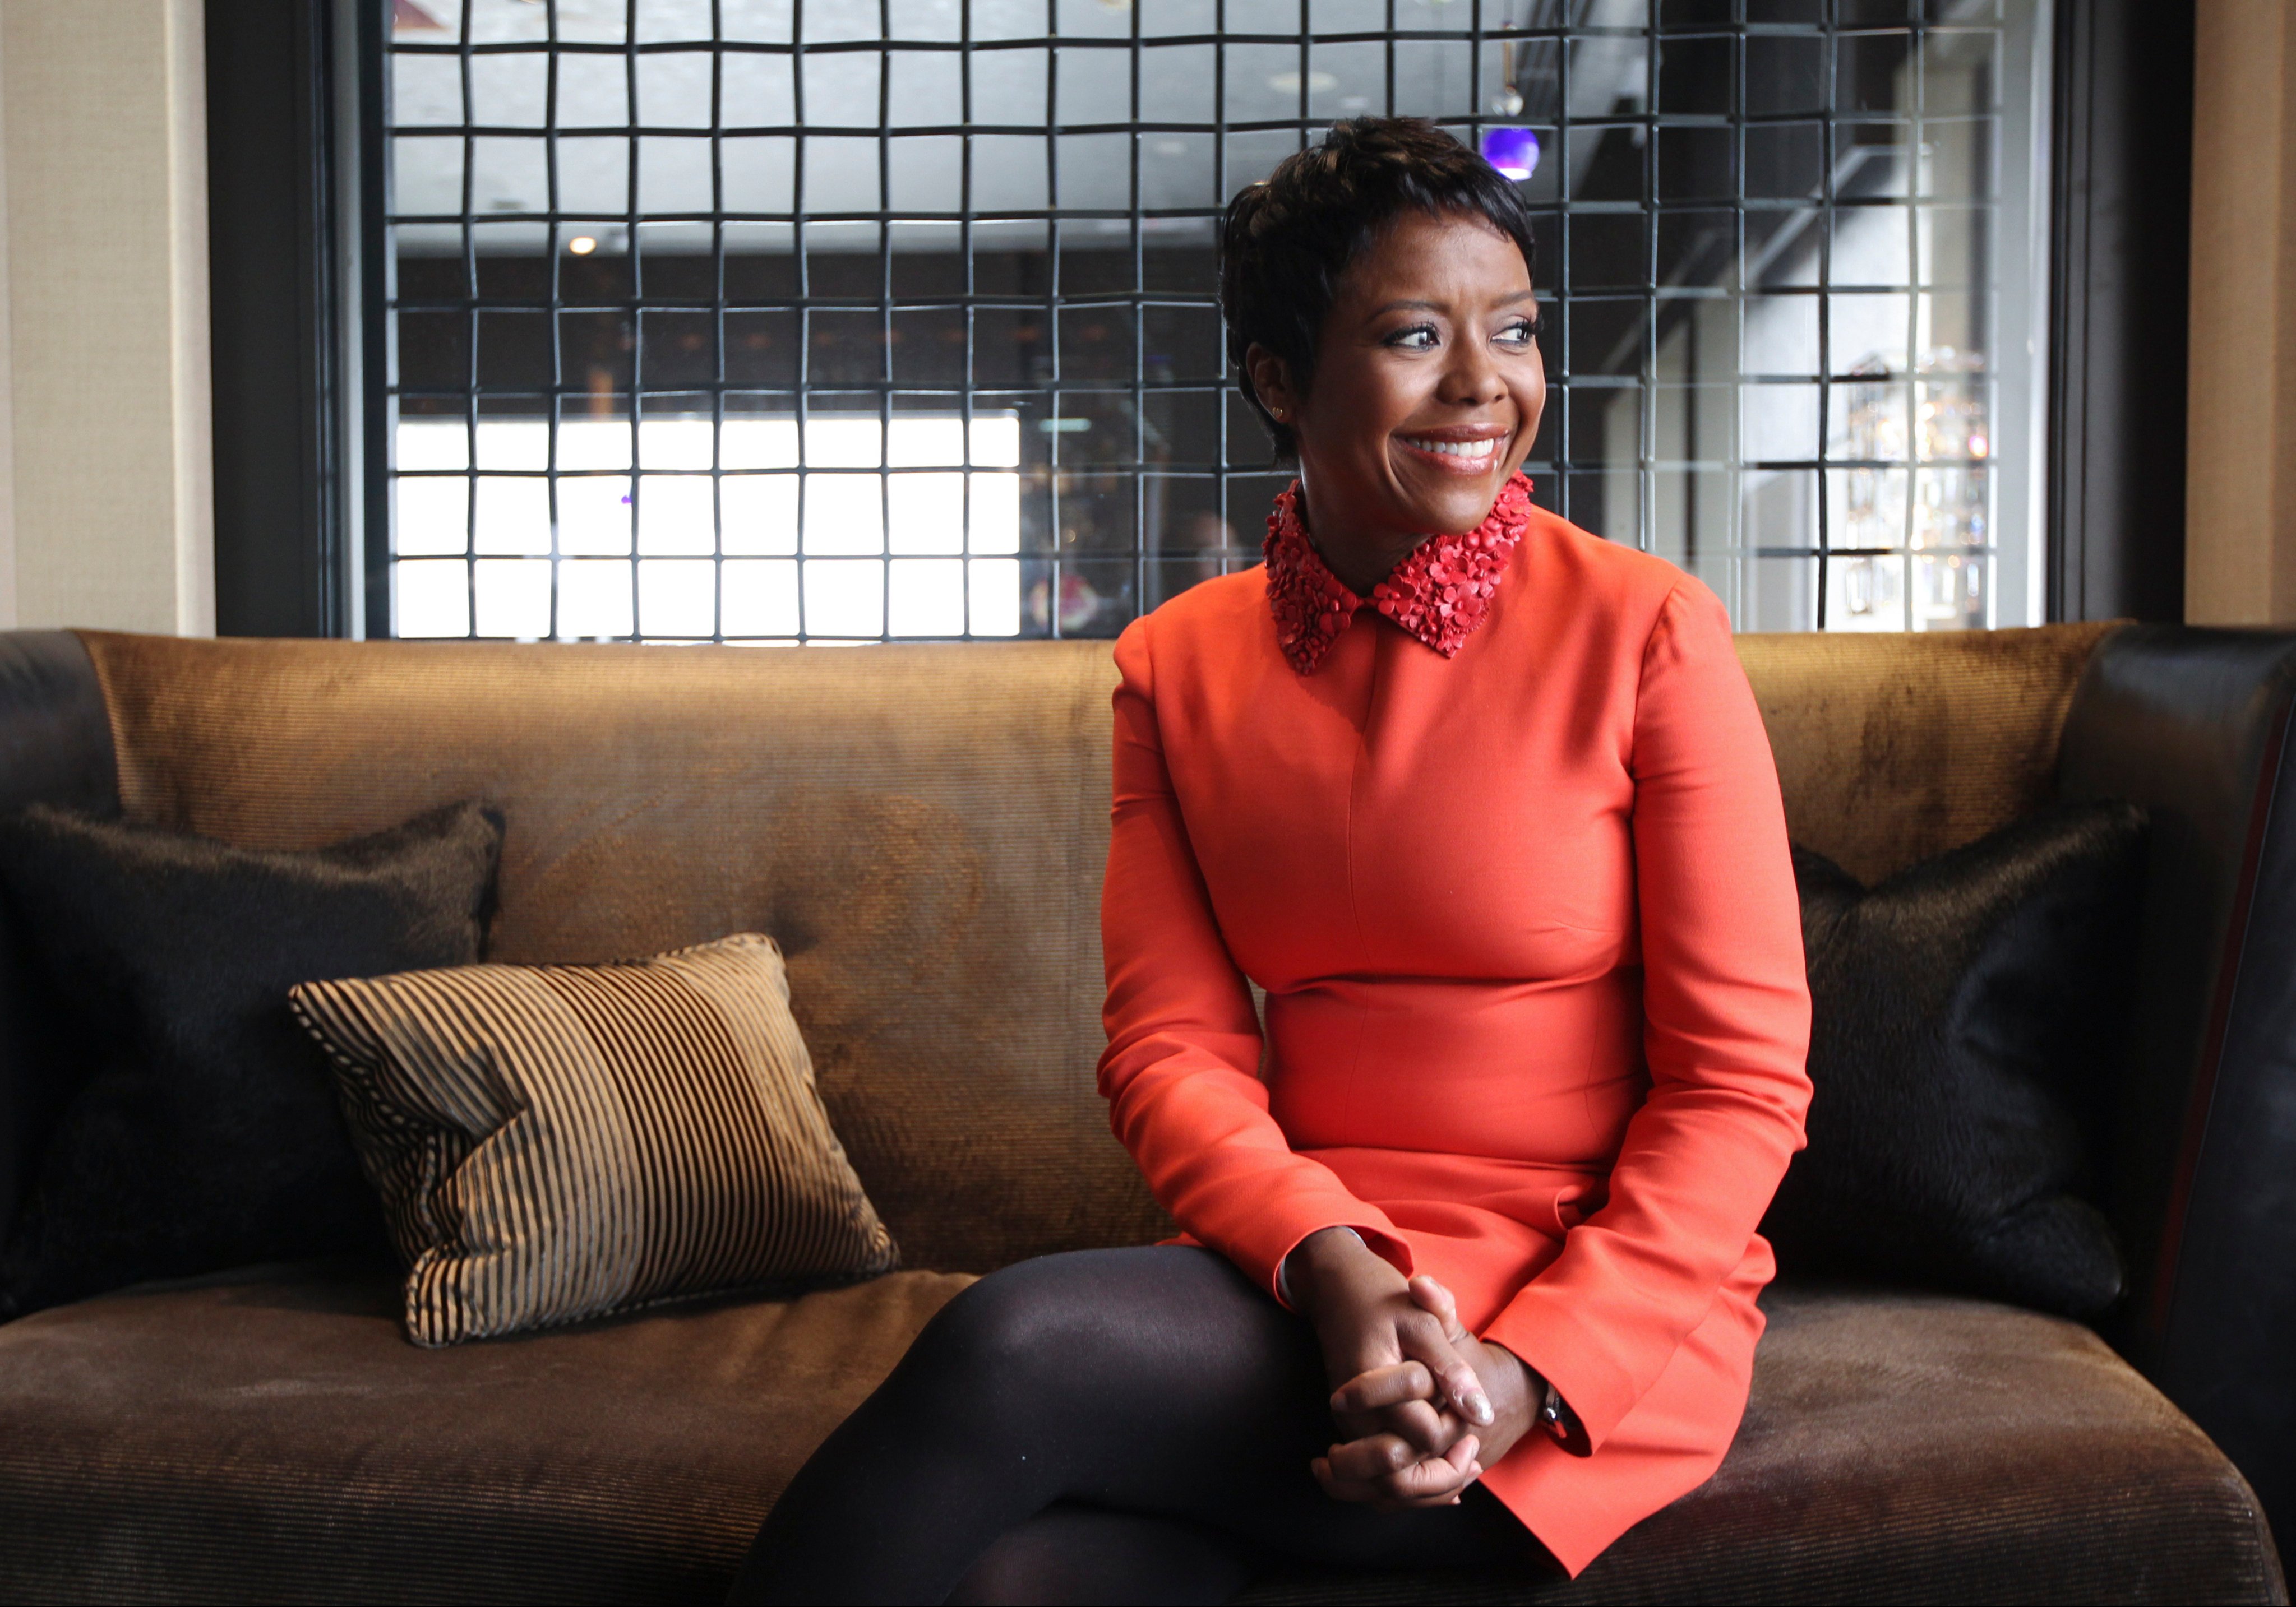 The partner of Star Wars creator George Lucas may be even more influential than he is: meet Mellody Hobson. Photo: Bruce Yan